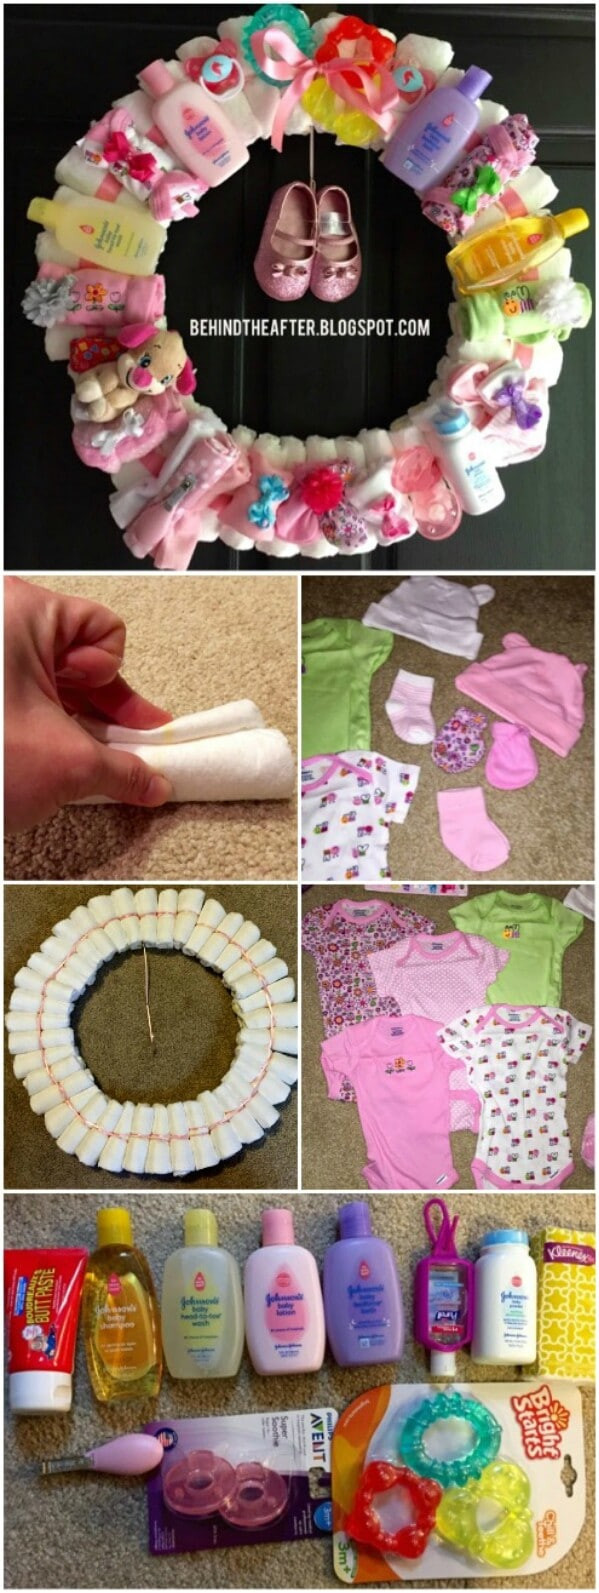 DIY Baby Shower Gifts Ideas
 25 Enchantingly Adorable Baby Shower Gift Ideas That Will Make You Go “A ww ” DIY & Crafts